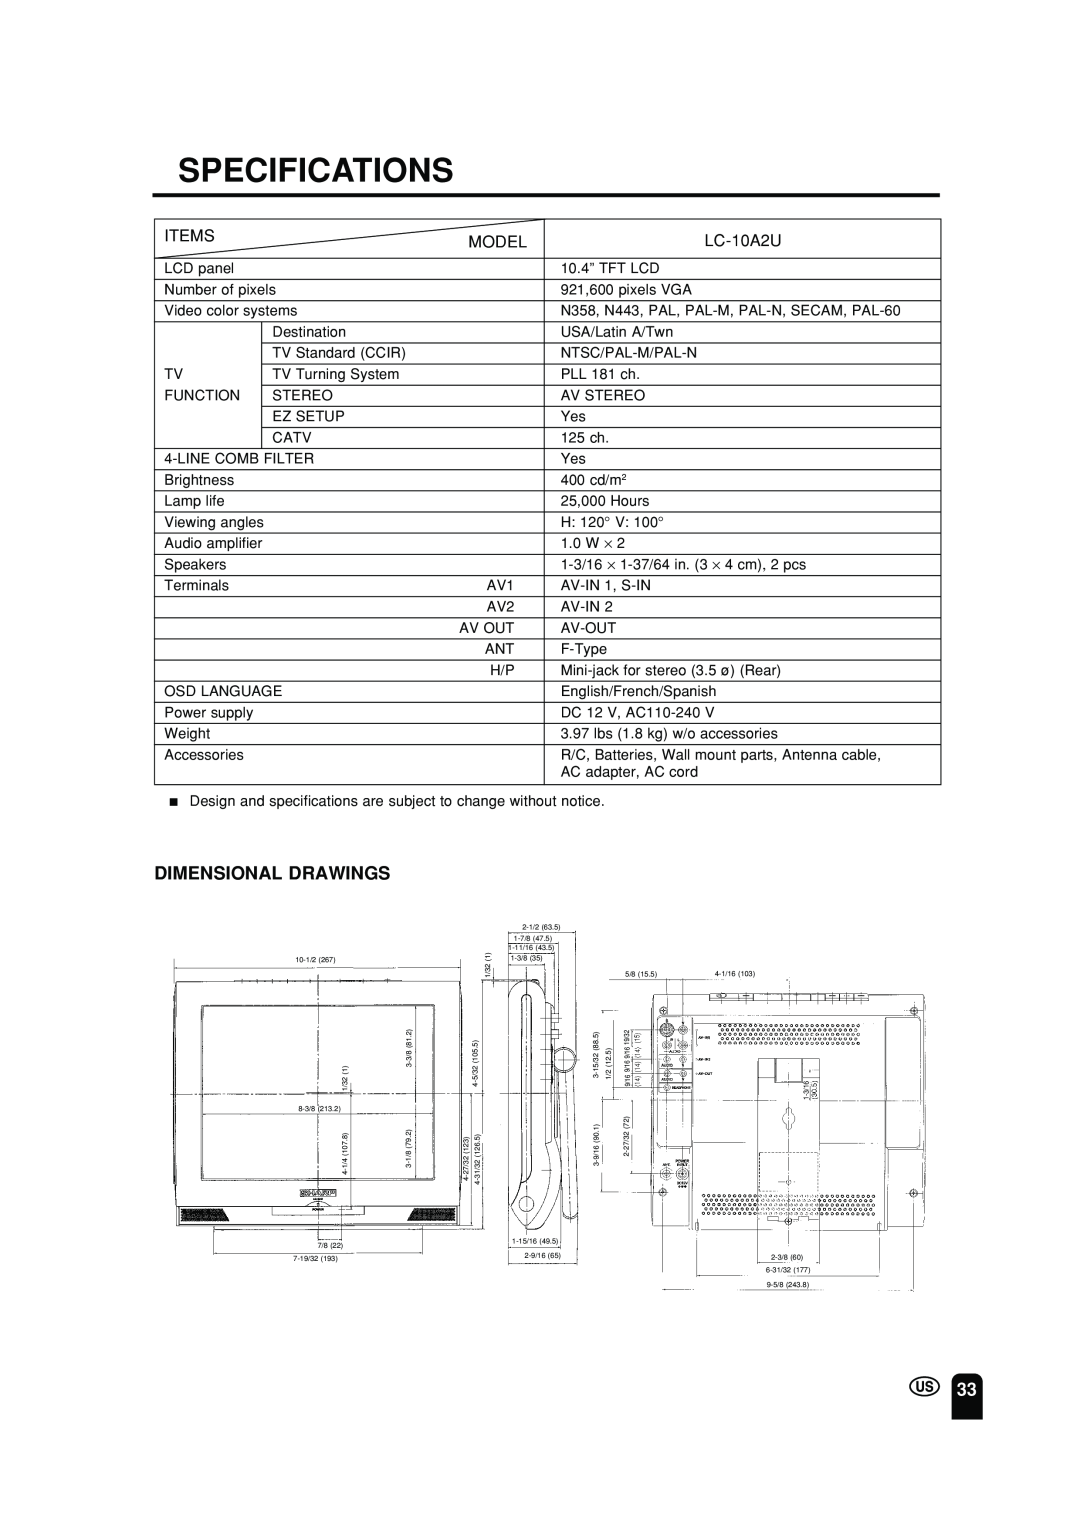 Sharp LC 10A2U operation manual Specifications, Dimensional Drawings 